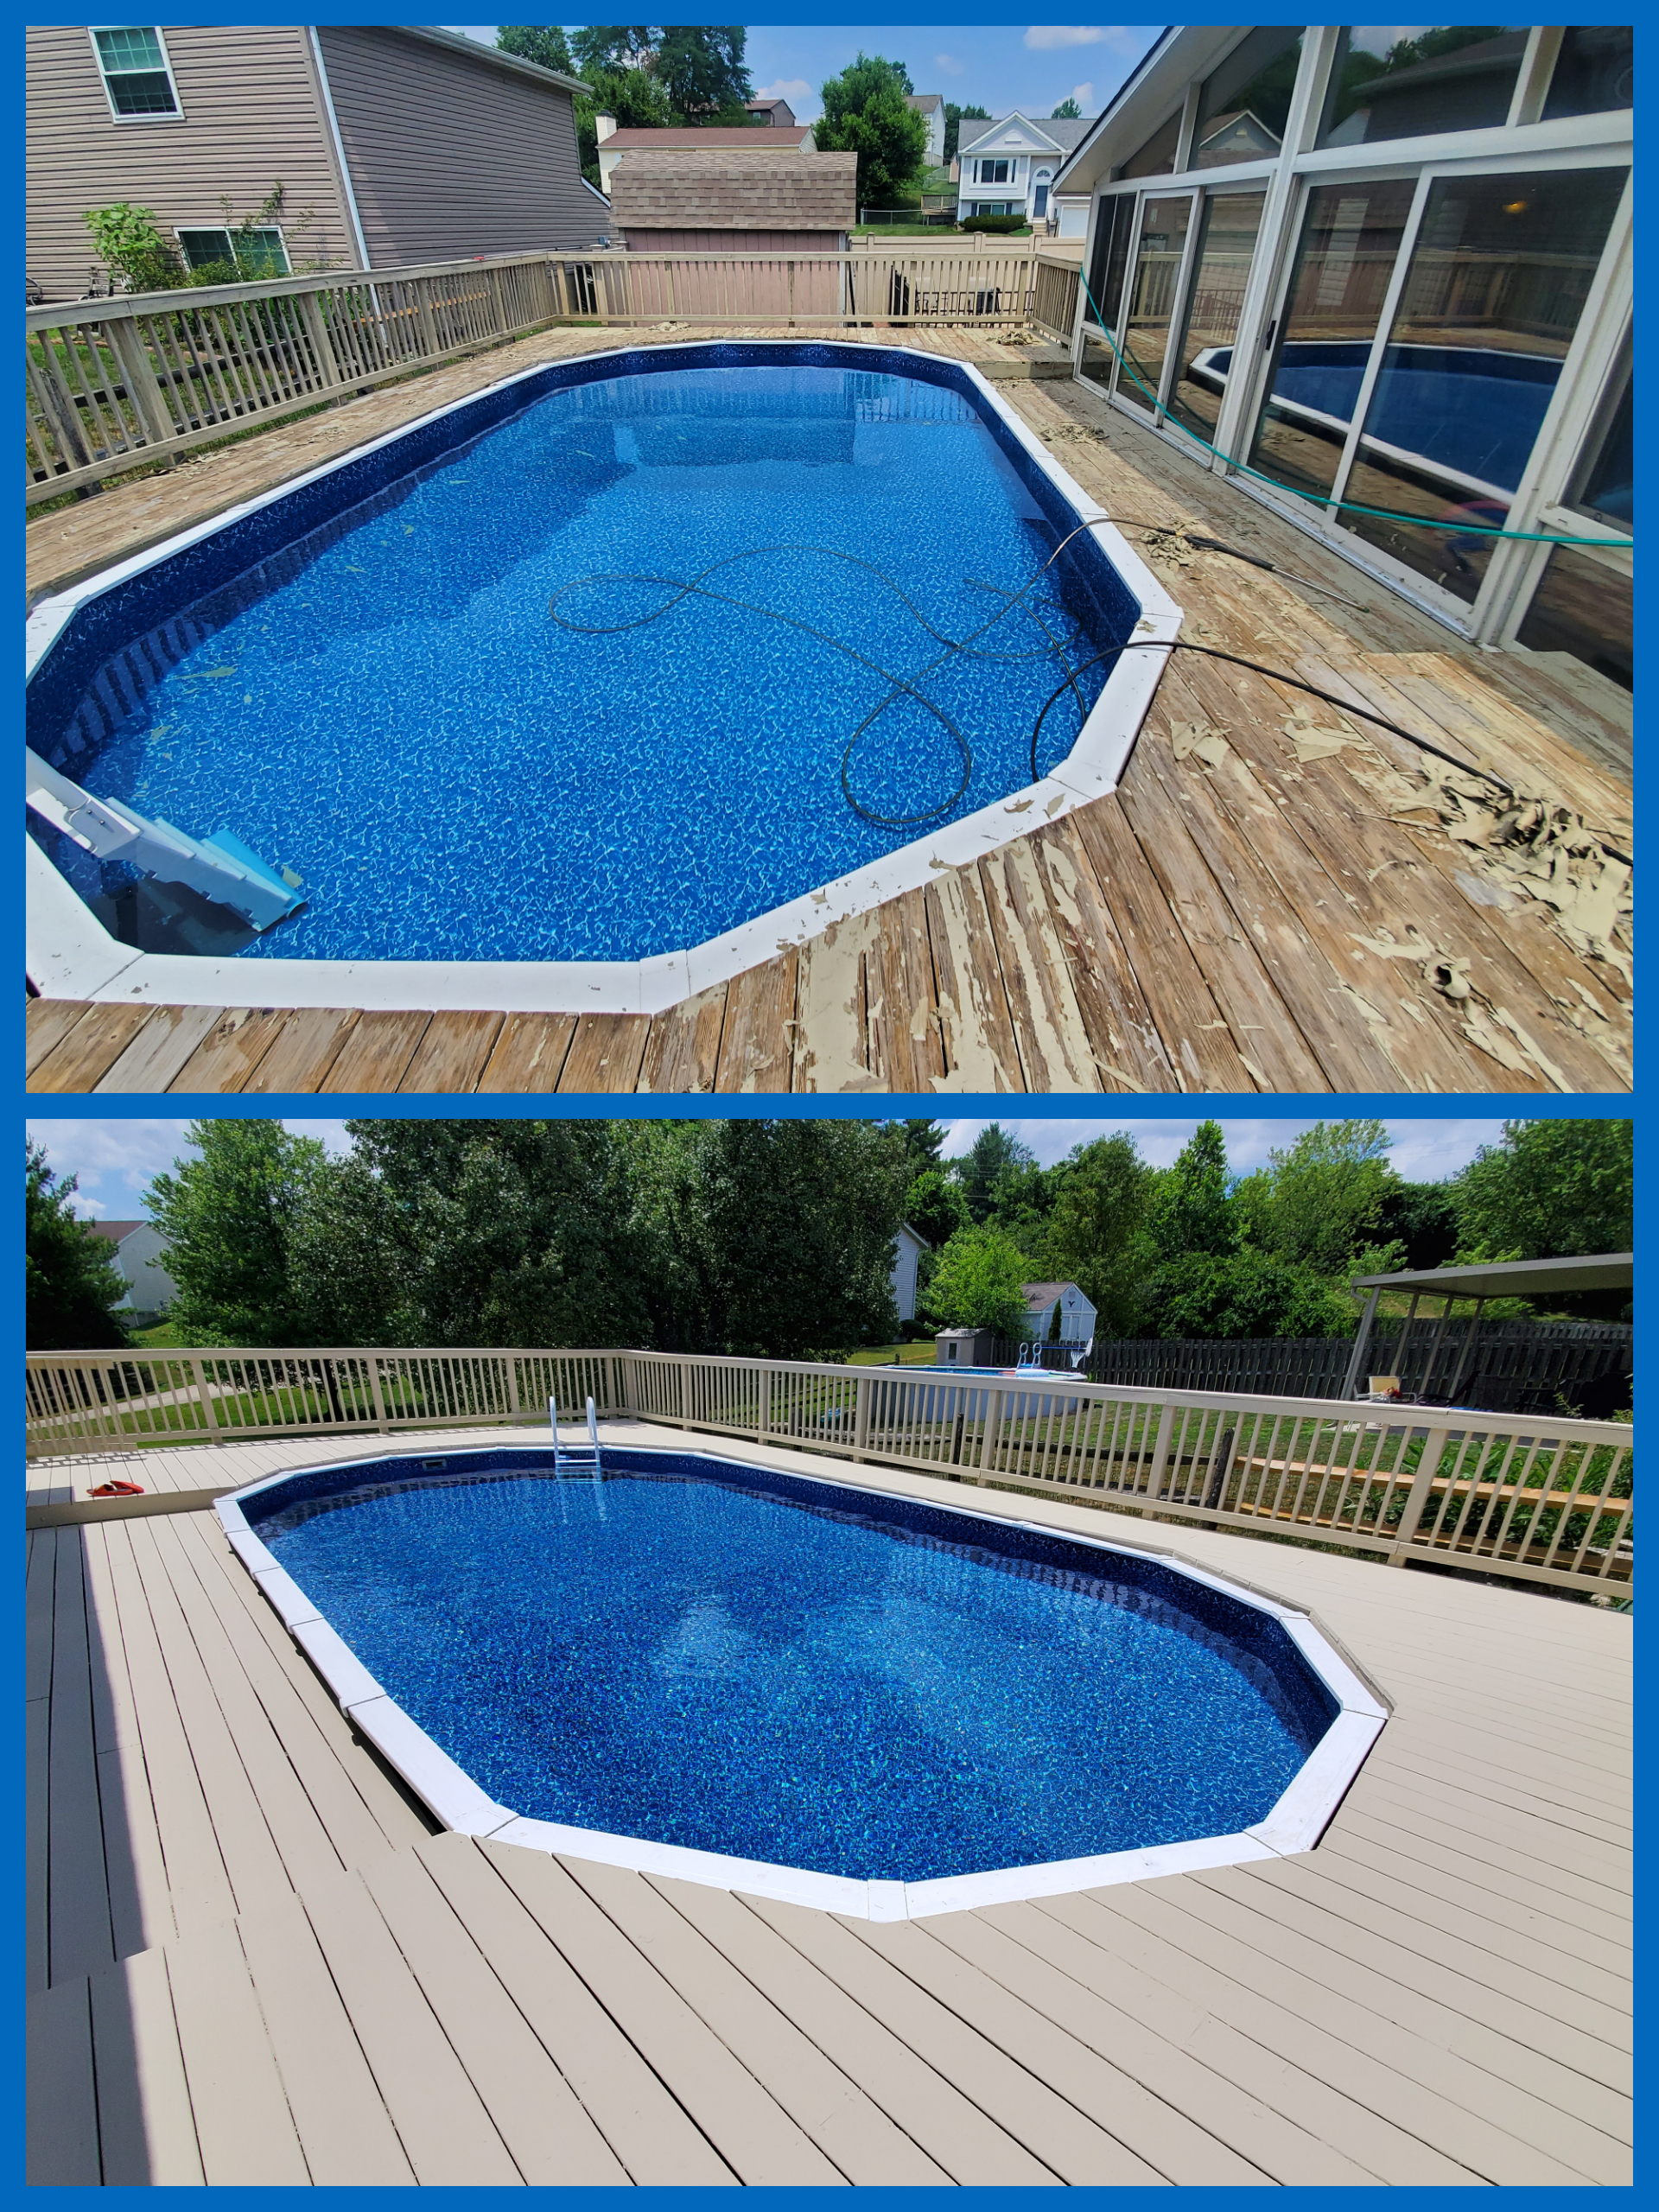 pool deck in Cincinnati ohio with peeling deck paint picture shows before and after being painted with kong Armor thick deck resurface paint